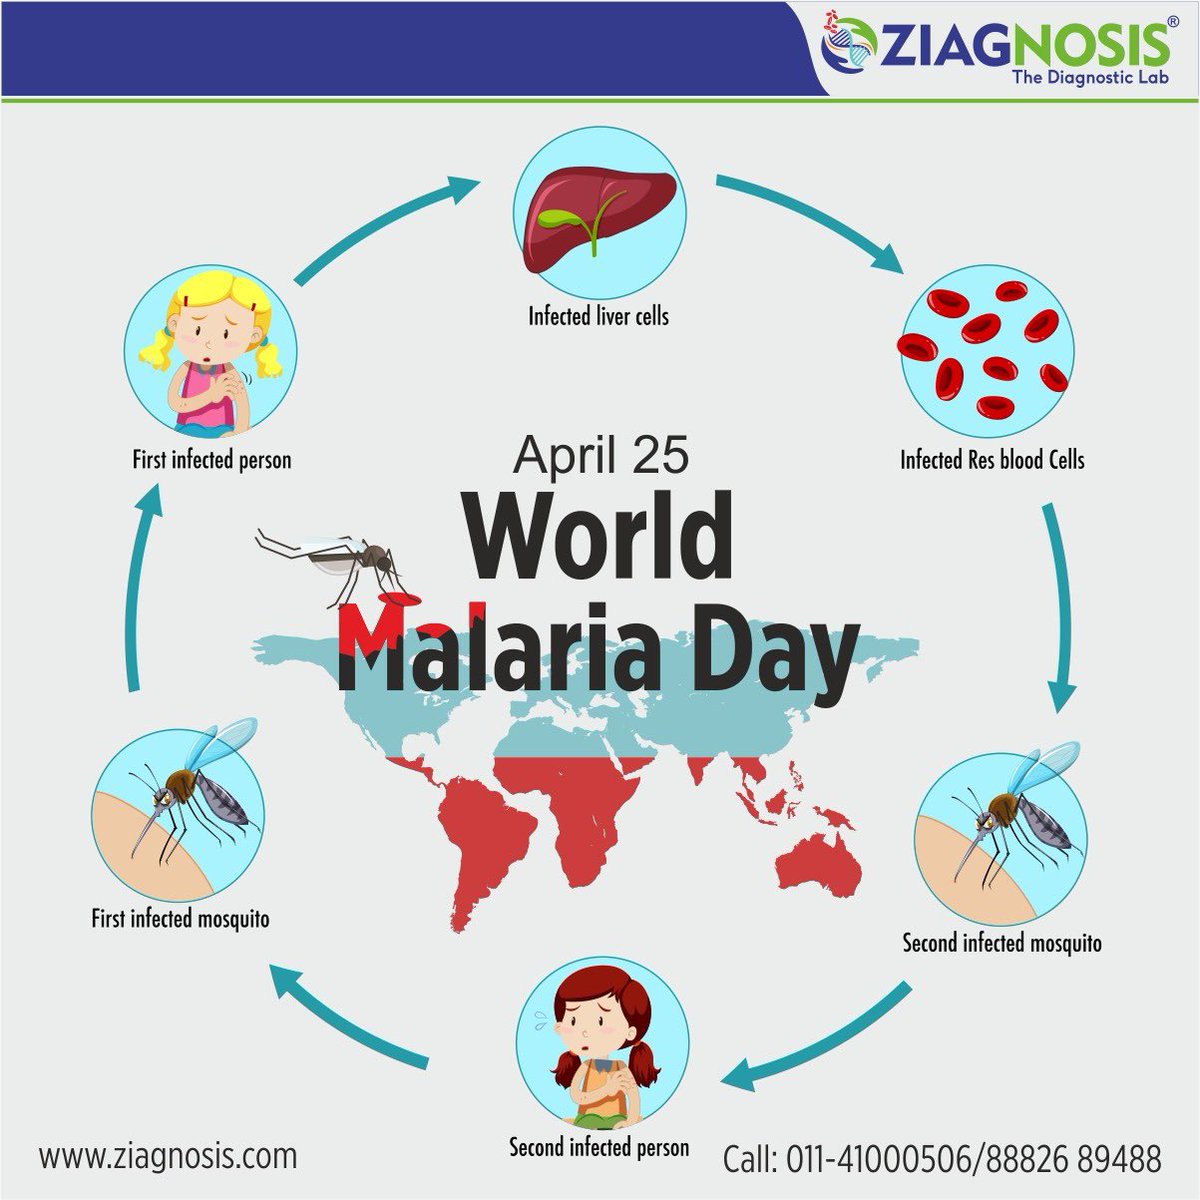 Worldwide Malaria is recognised as a life threatening disease. More than half a million people die every year due to #malaria
#WorldMalariaDay2023 #Malariaday @MoHFW_INDIA @NTDFreeIndia 
#Diagnose_Malaria to start early treatment